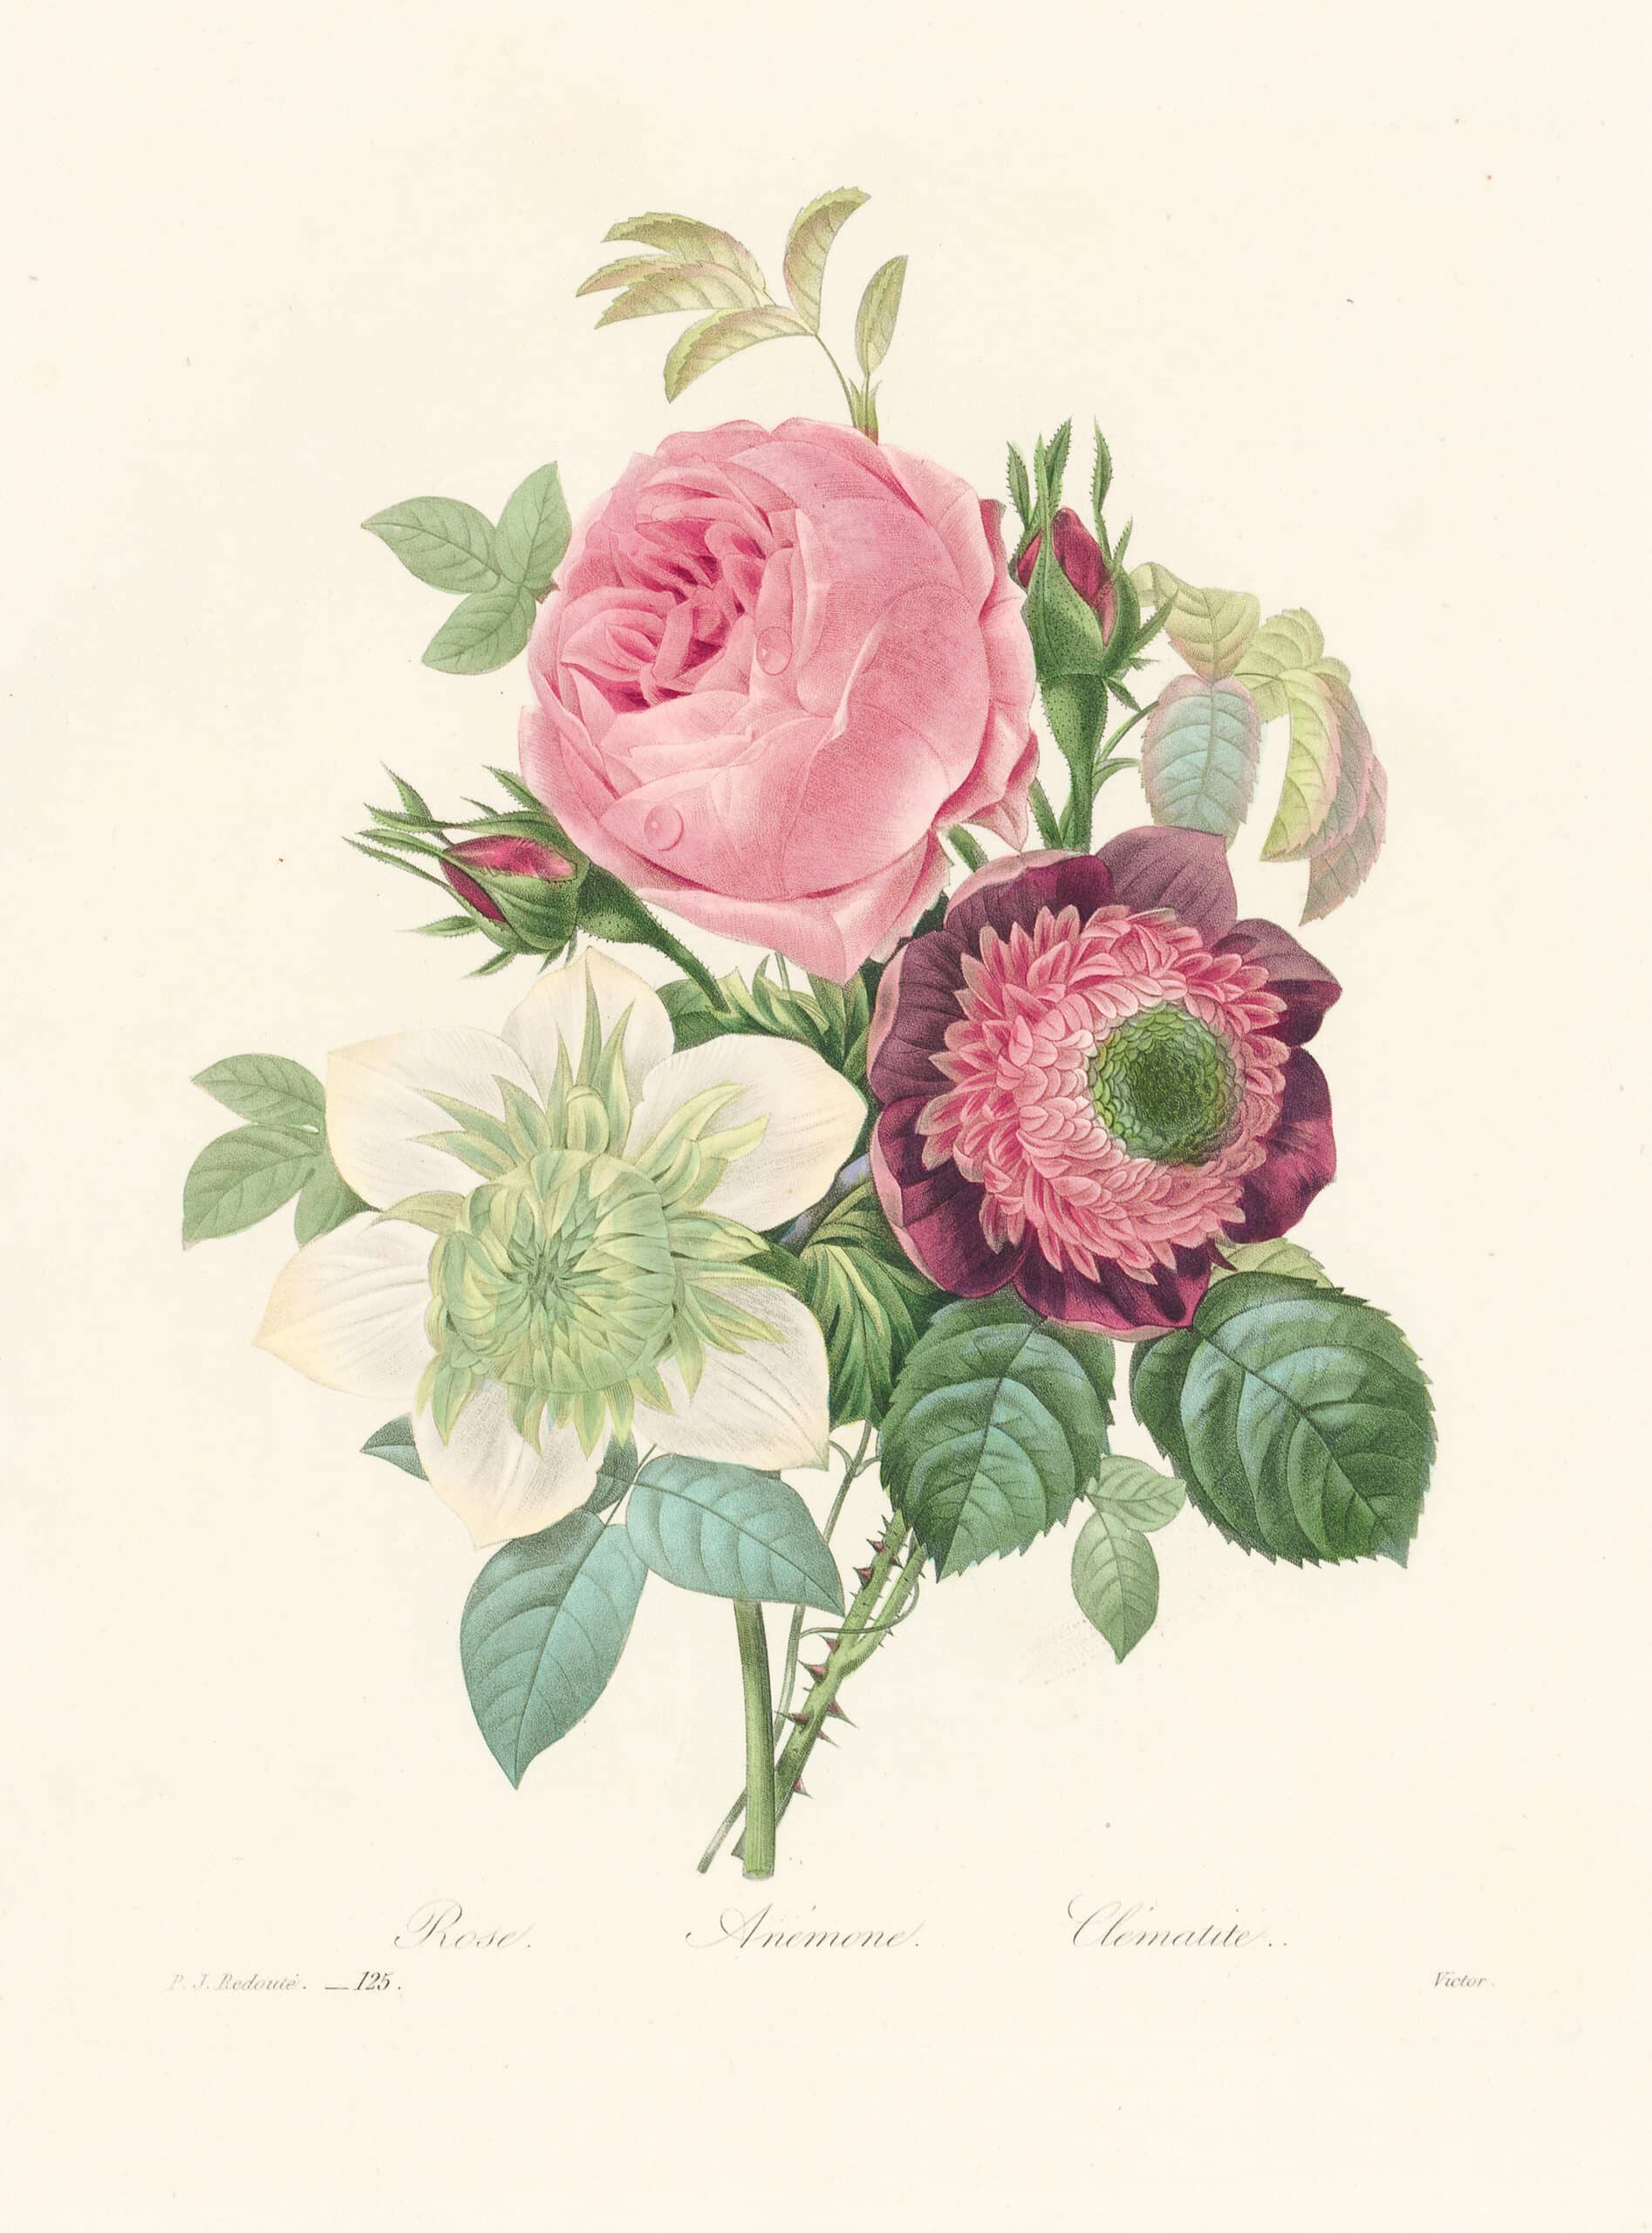 Redouté Choix Pl. 125, Bouquet of Roses, Anemone and Clematis